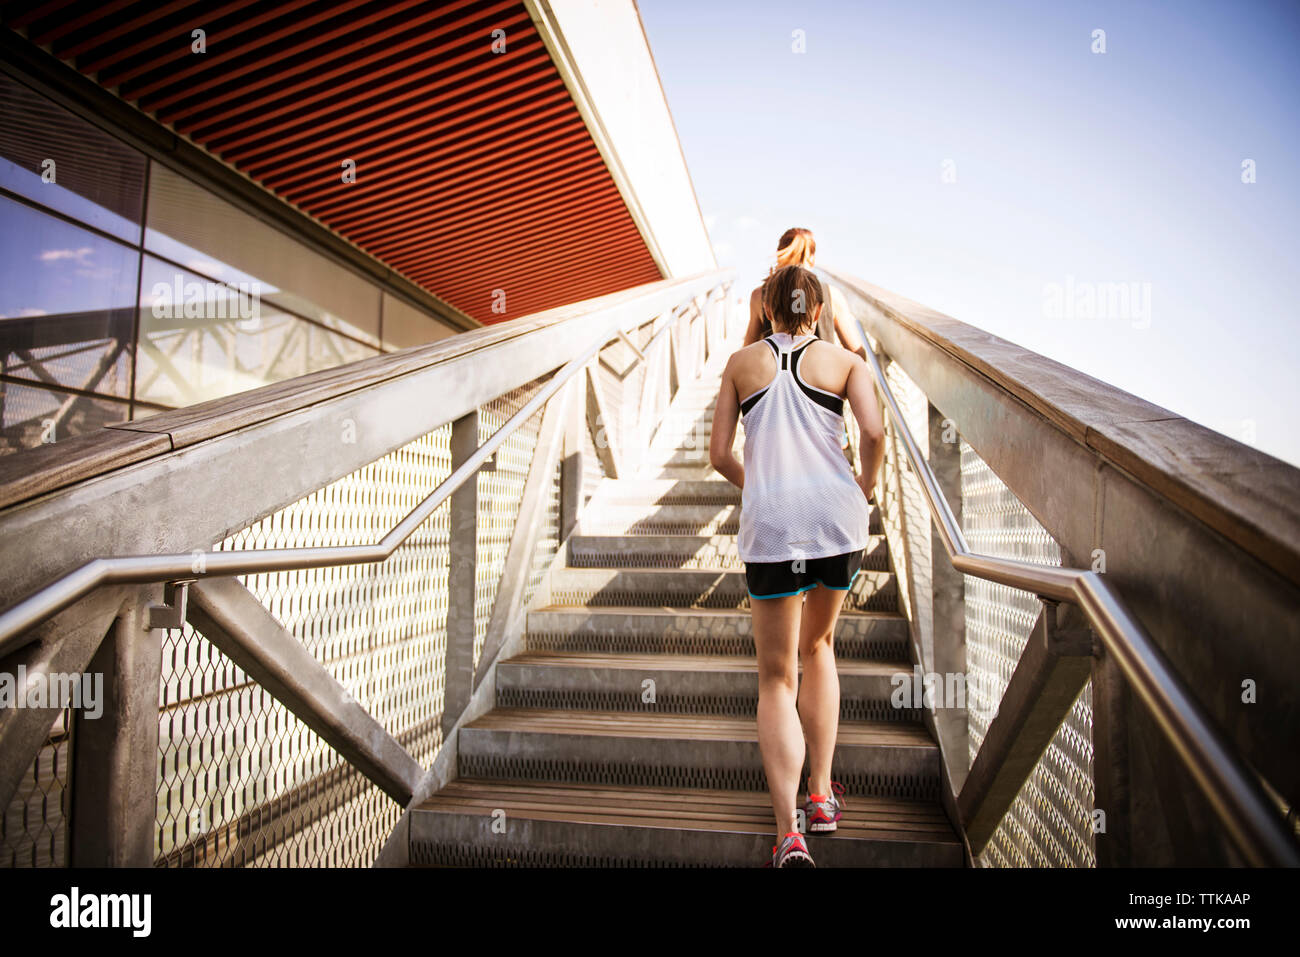 Rear view of women walking on steps and staircases against clear sky Stock Photo